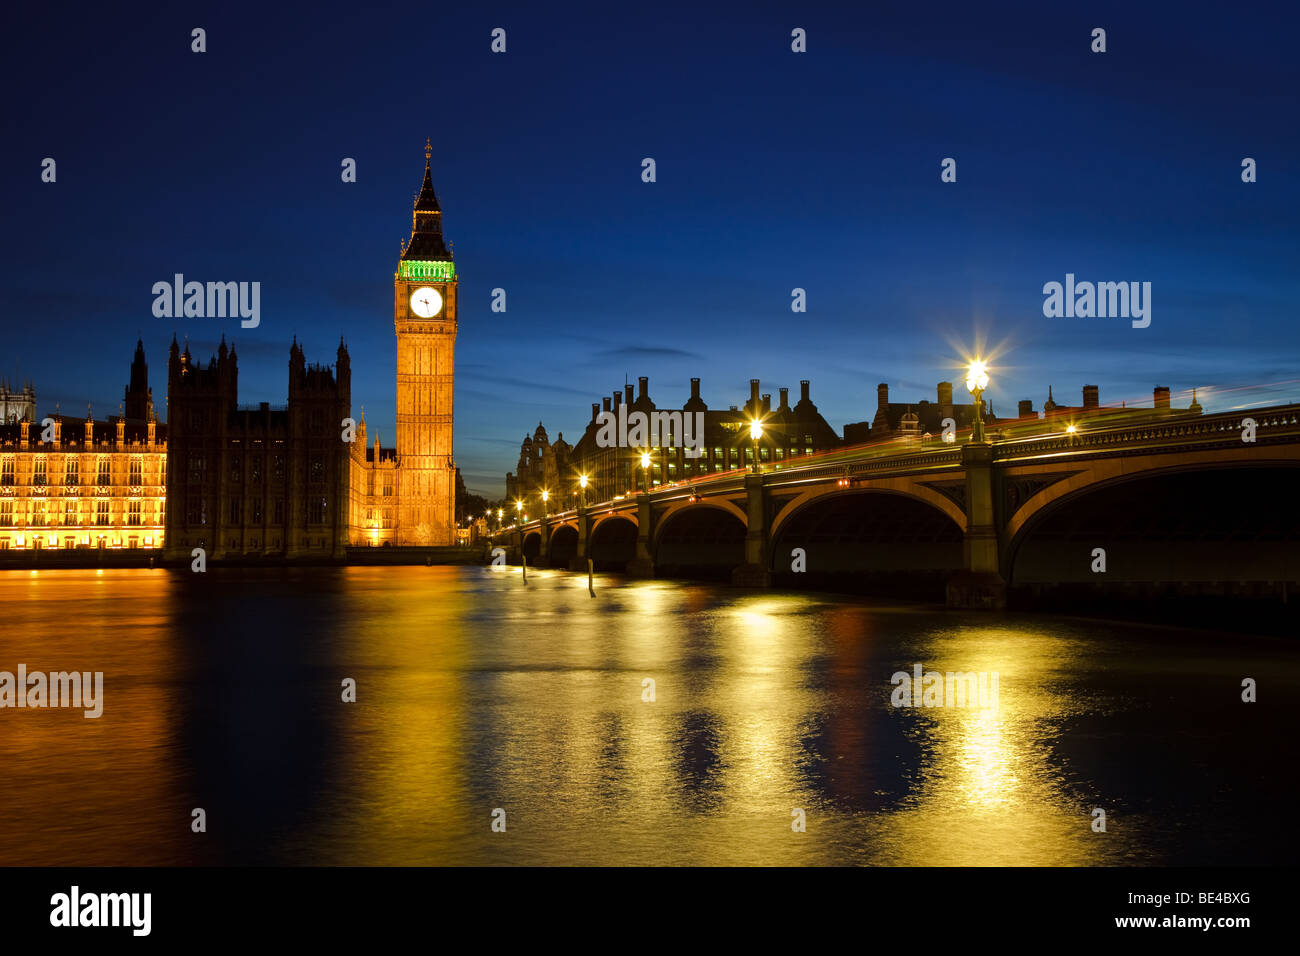 Big Ben and Houses of Parliament at night, London, UK Stock Photo